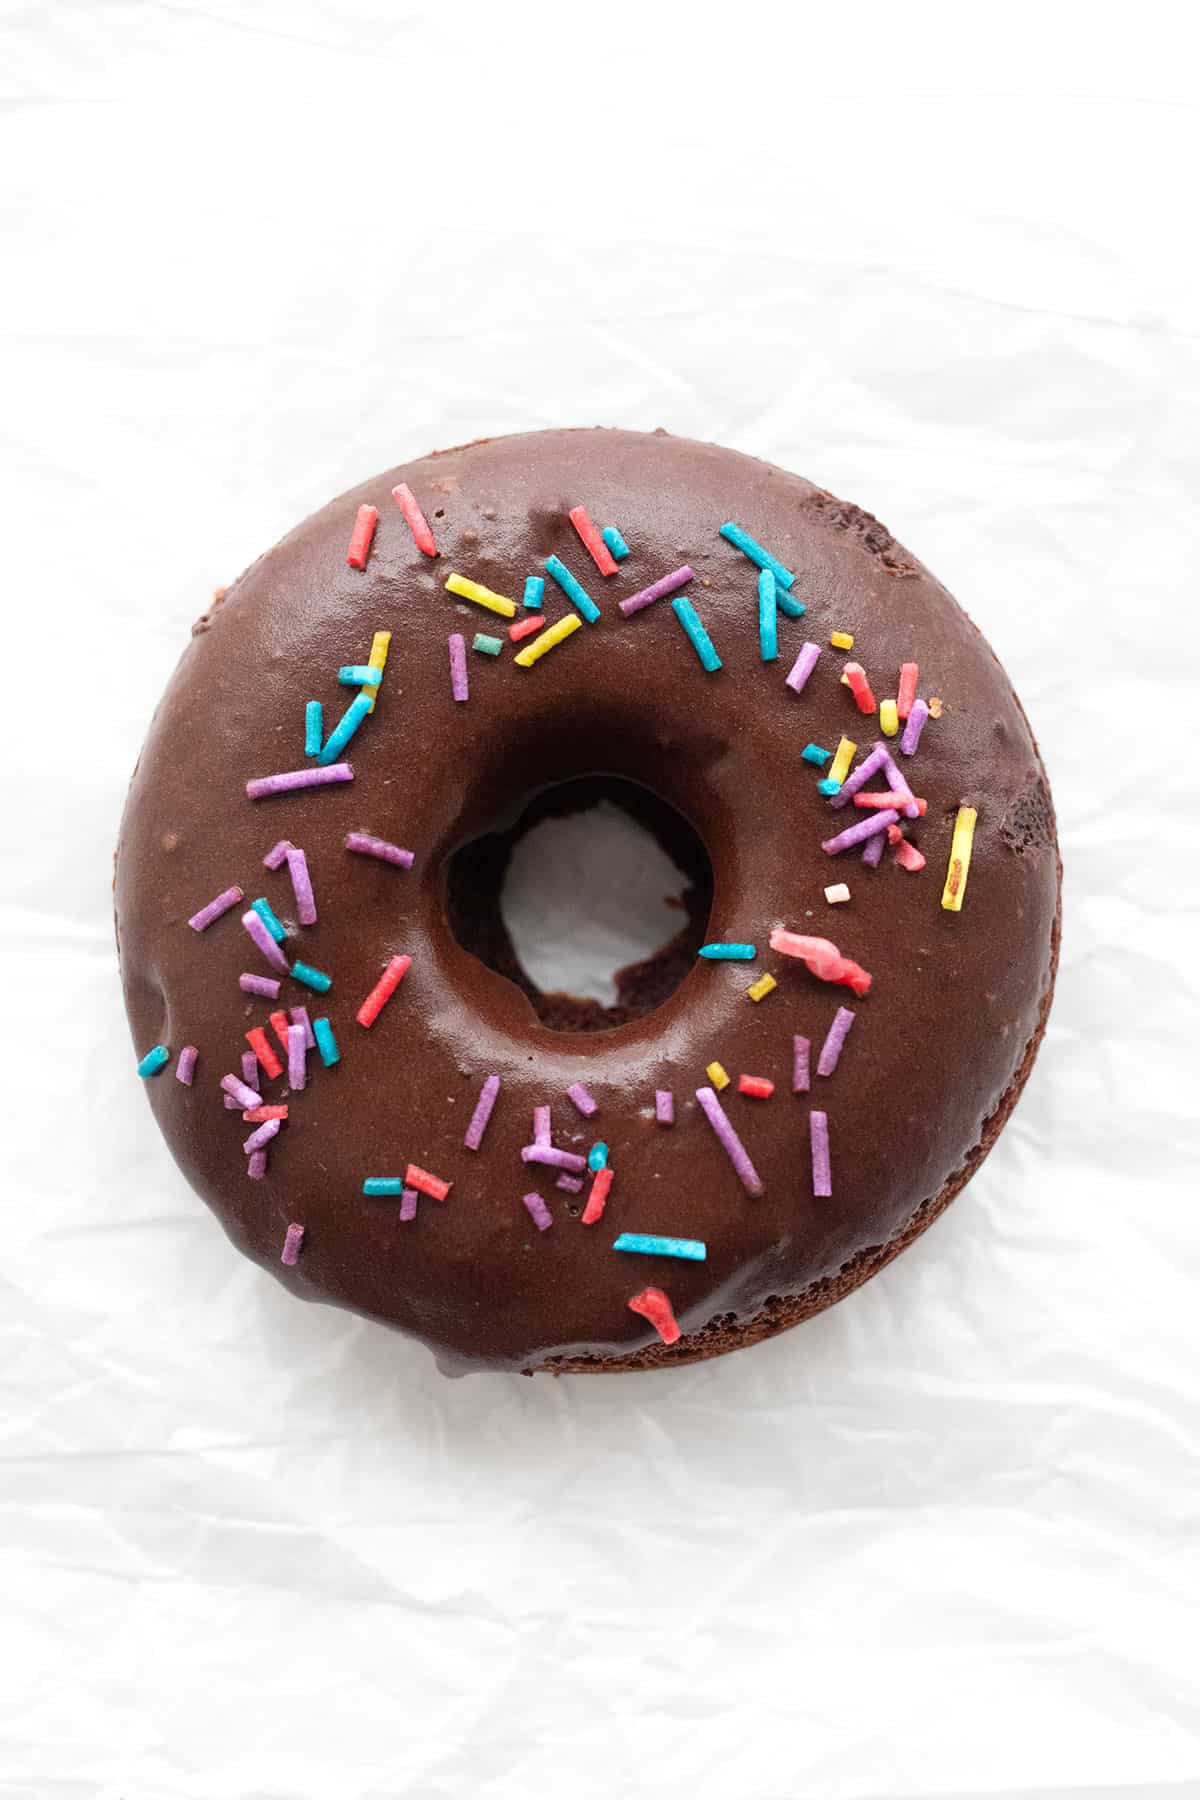 Top down image of a keto chocolate donut with sprinkles on a white background.